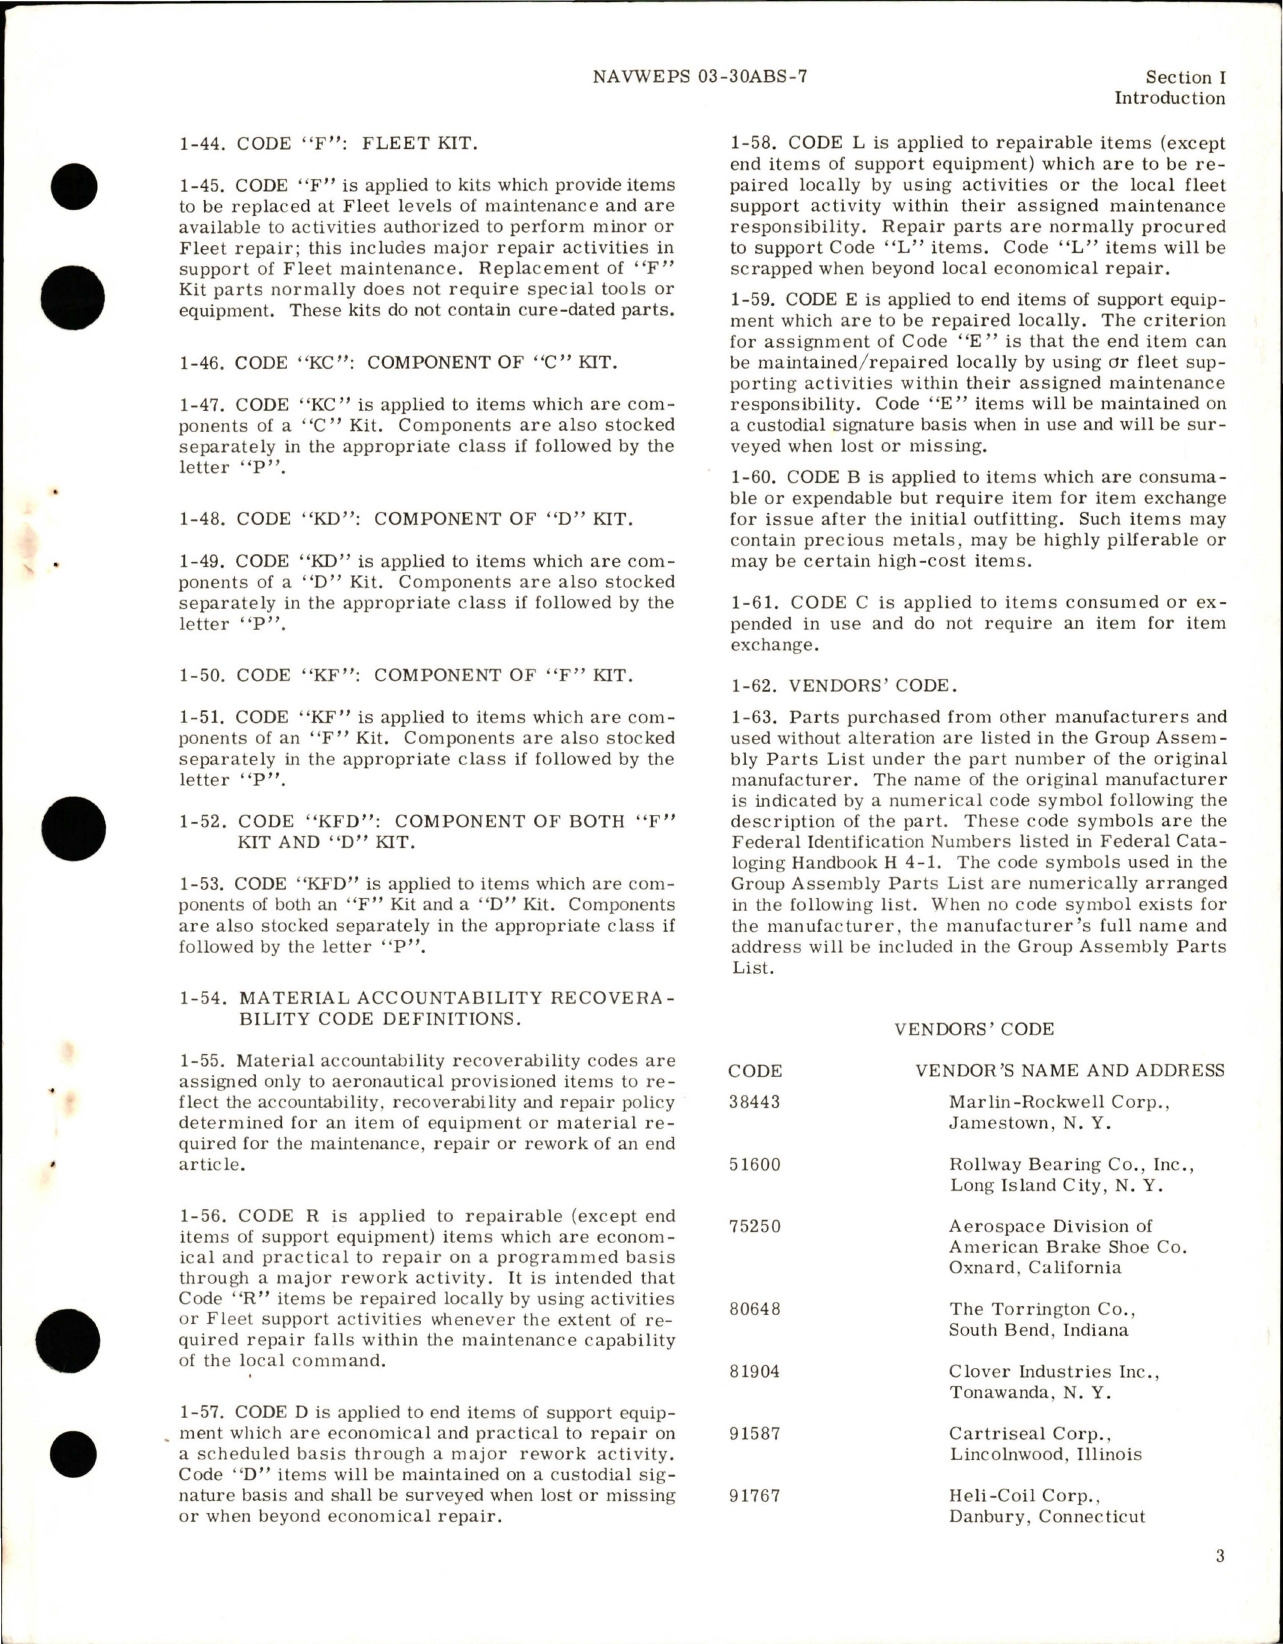 Sample page 5 from AirCorps Library document: Illustrated Parts Breakdown for Variable Displacement Hydraulic Pump - Models AP6VSC-2 and AP6VSC-16 - Parts 51015 and 51054 